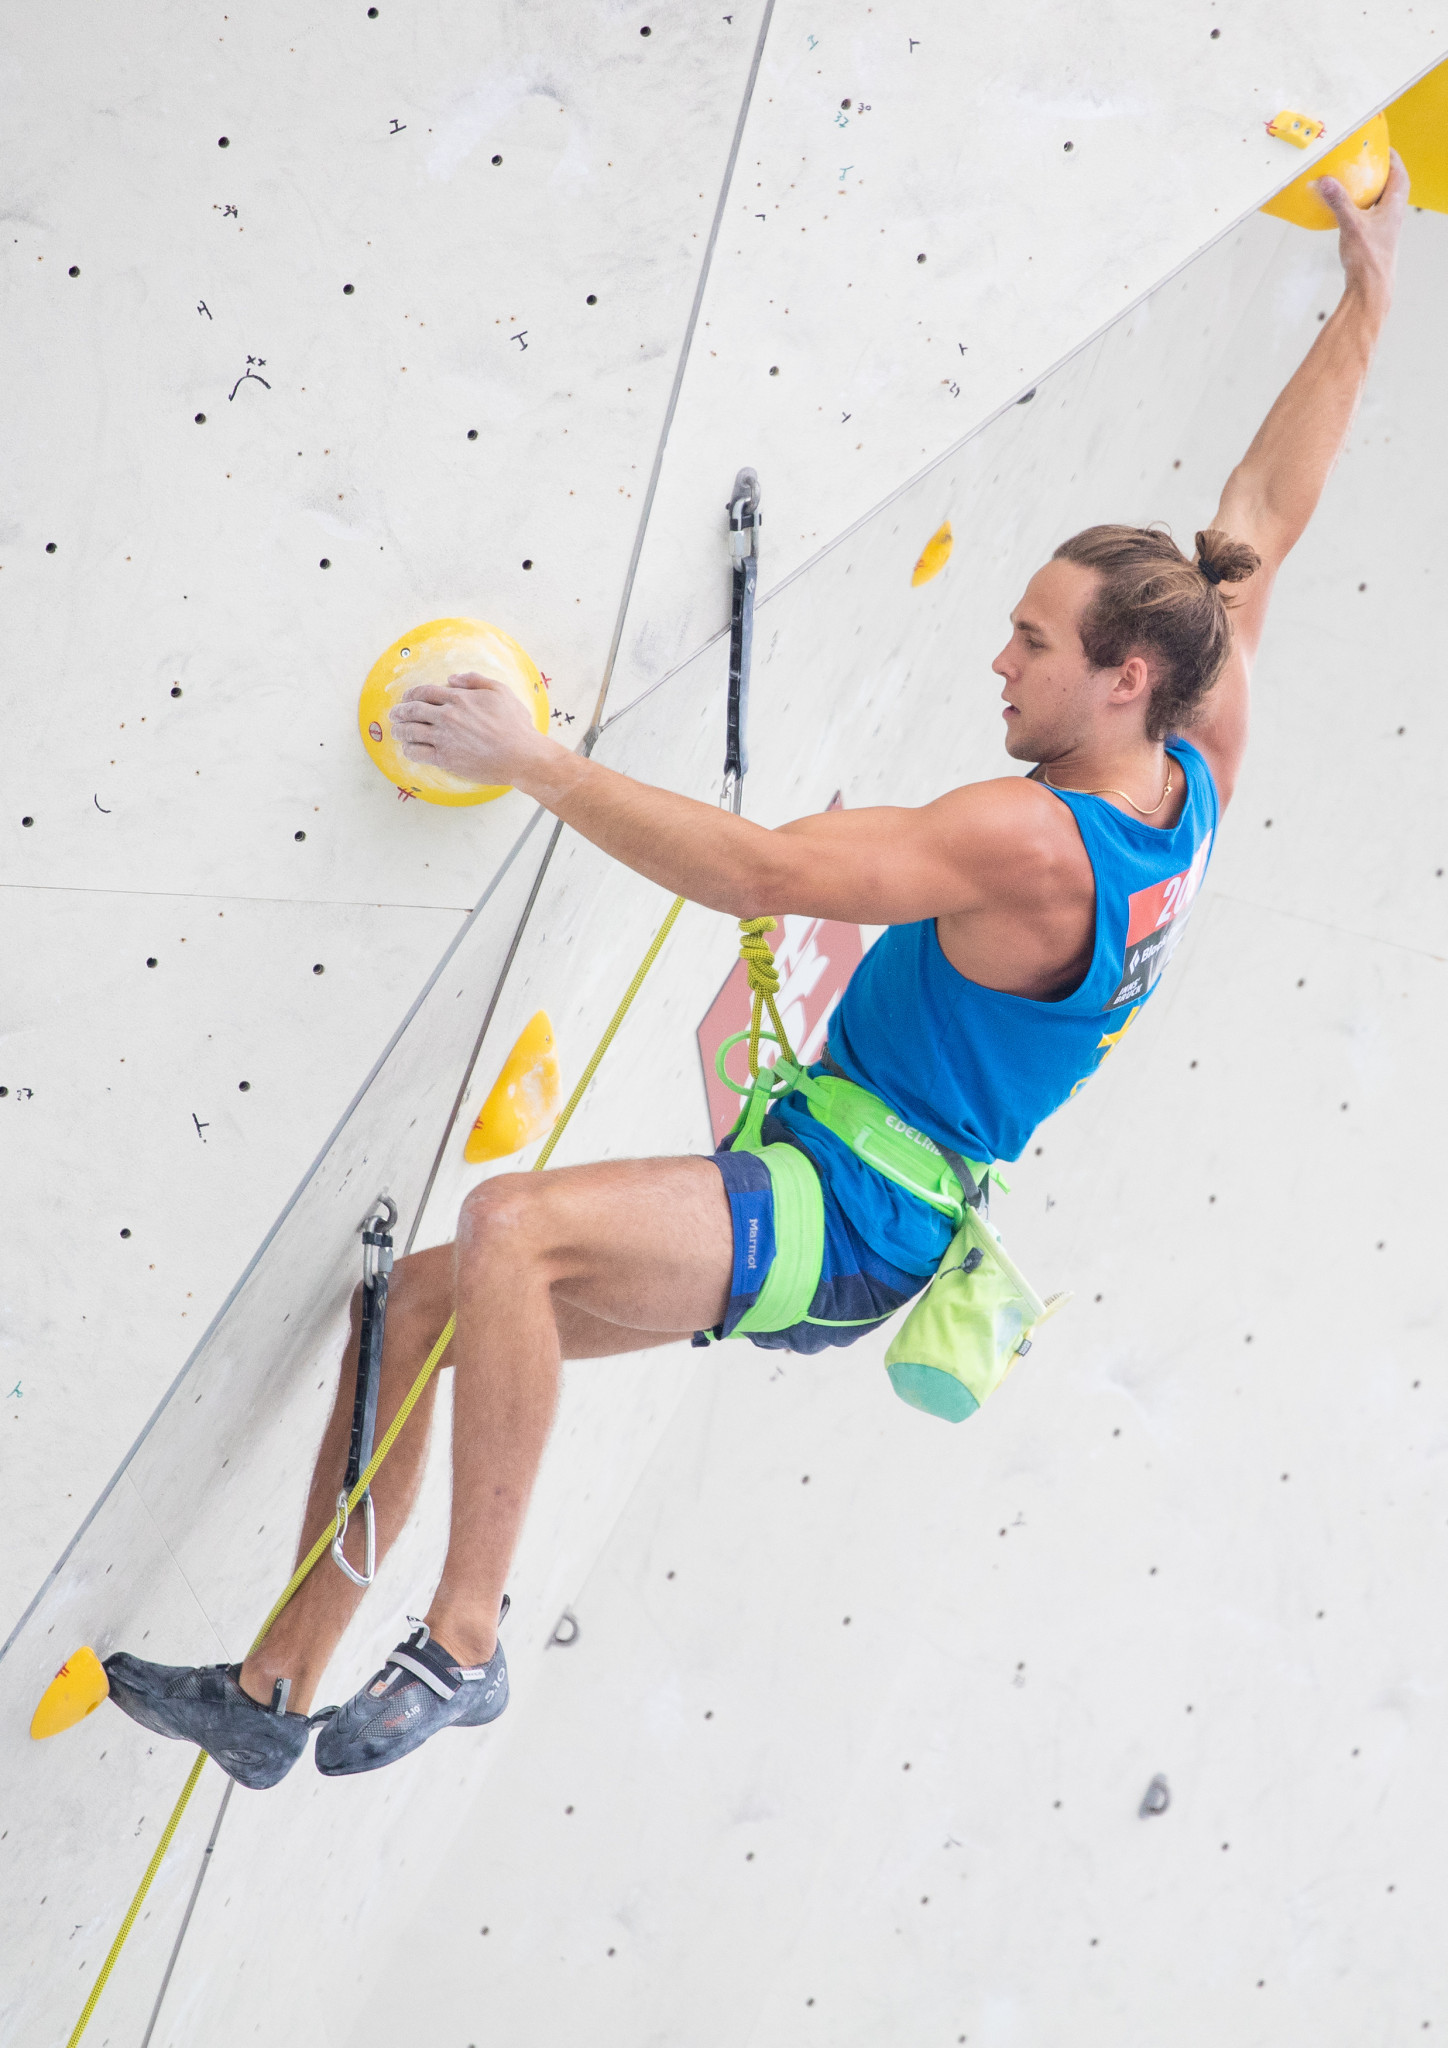 Hannes Puman of Sweden topped the men's lead qualifying at the IFSC European Championships ©Getty Images